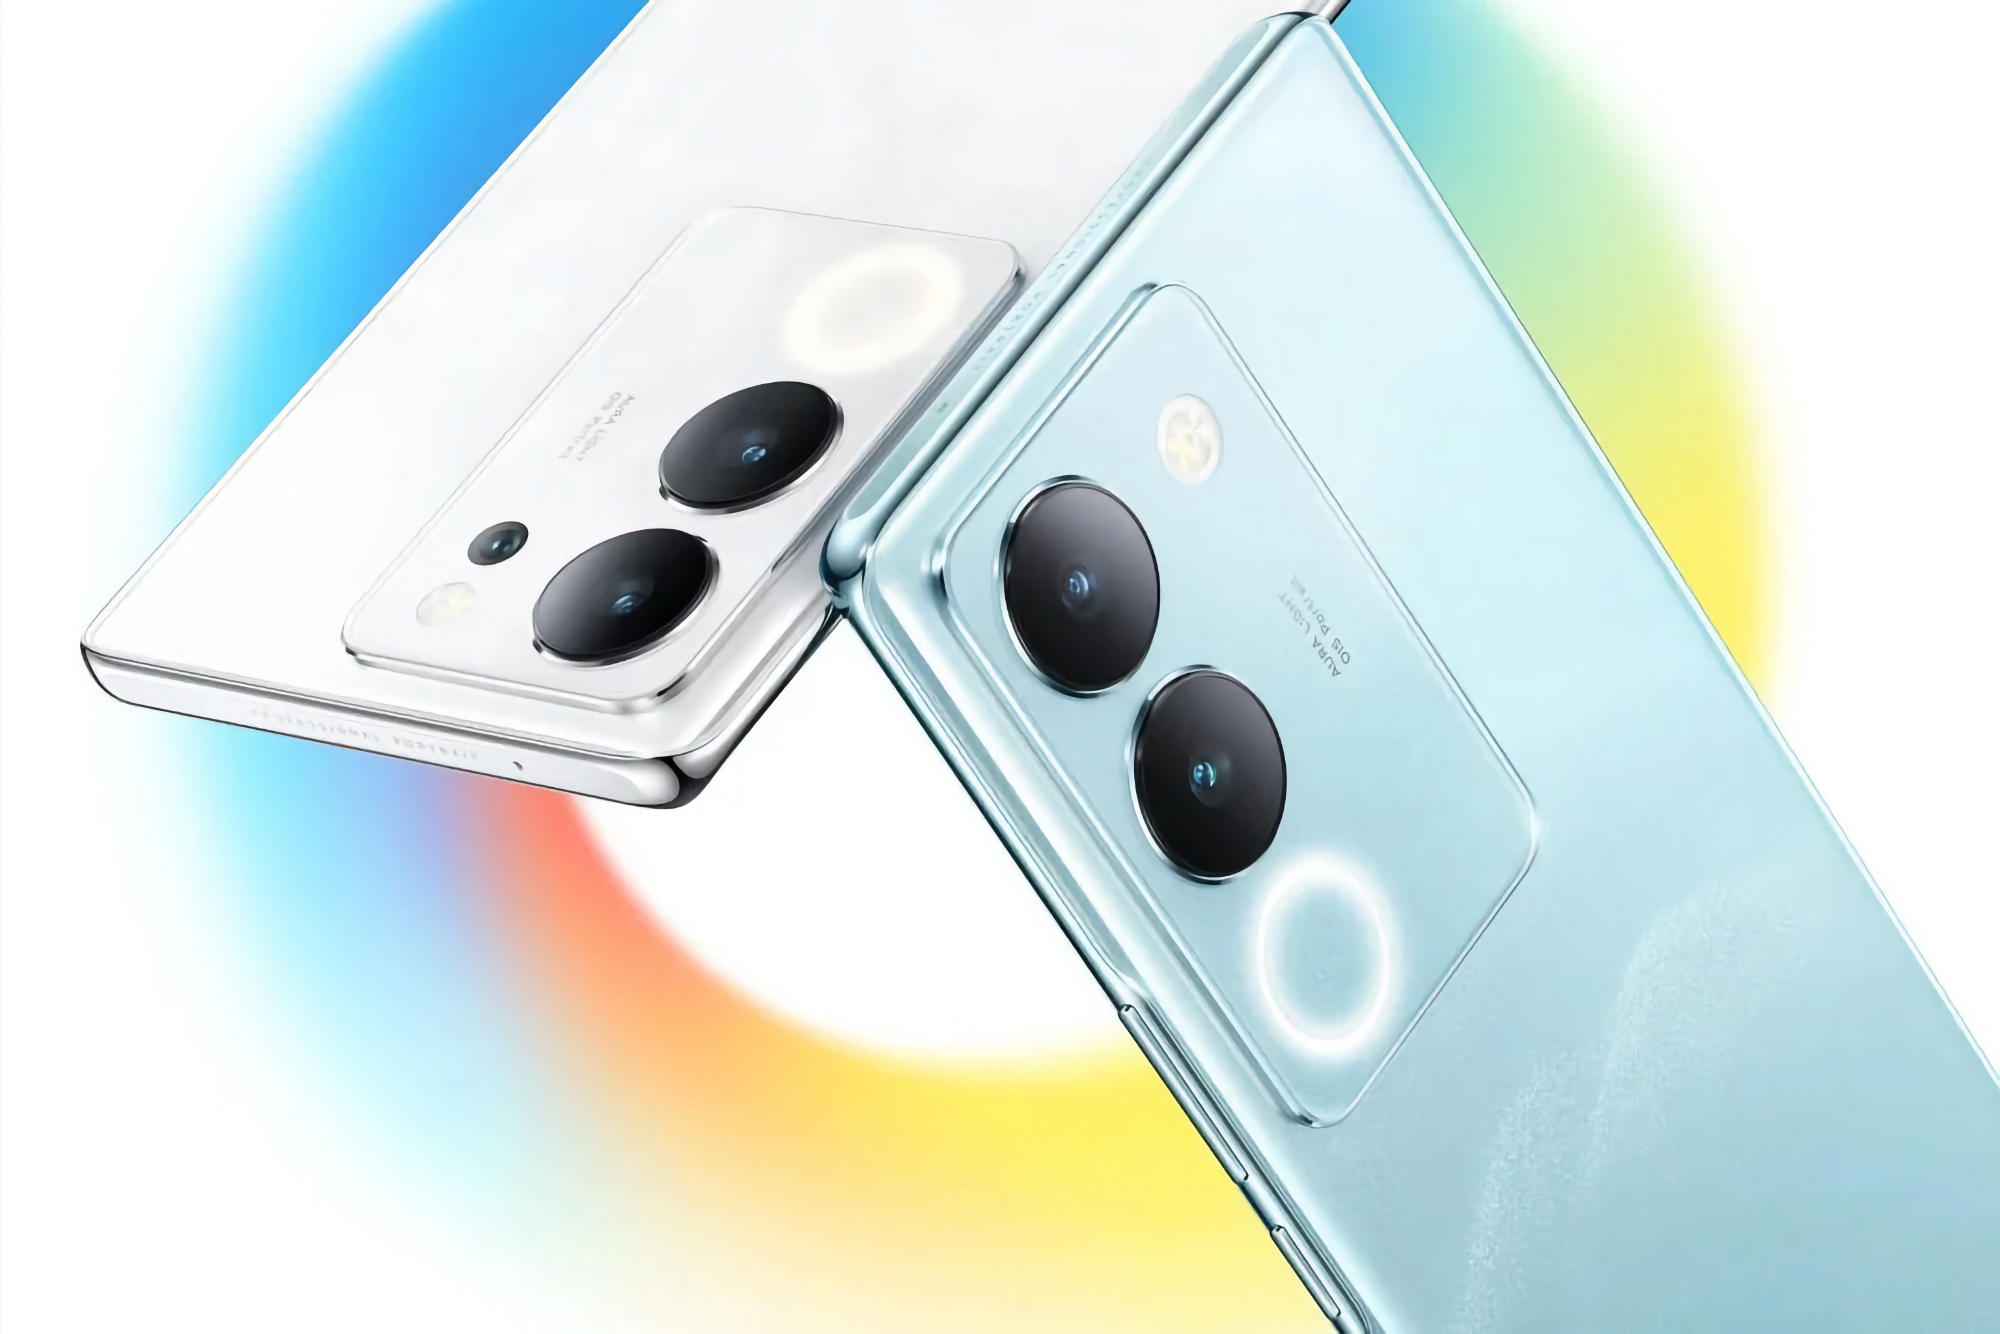 It's official: the vivo S18 and vivo S18 Pro will debut in December